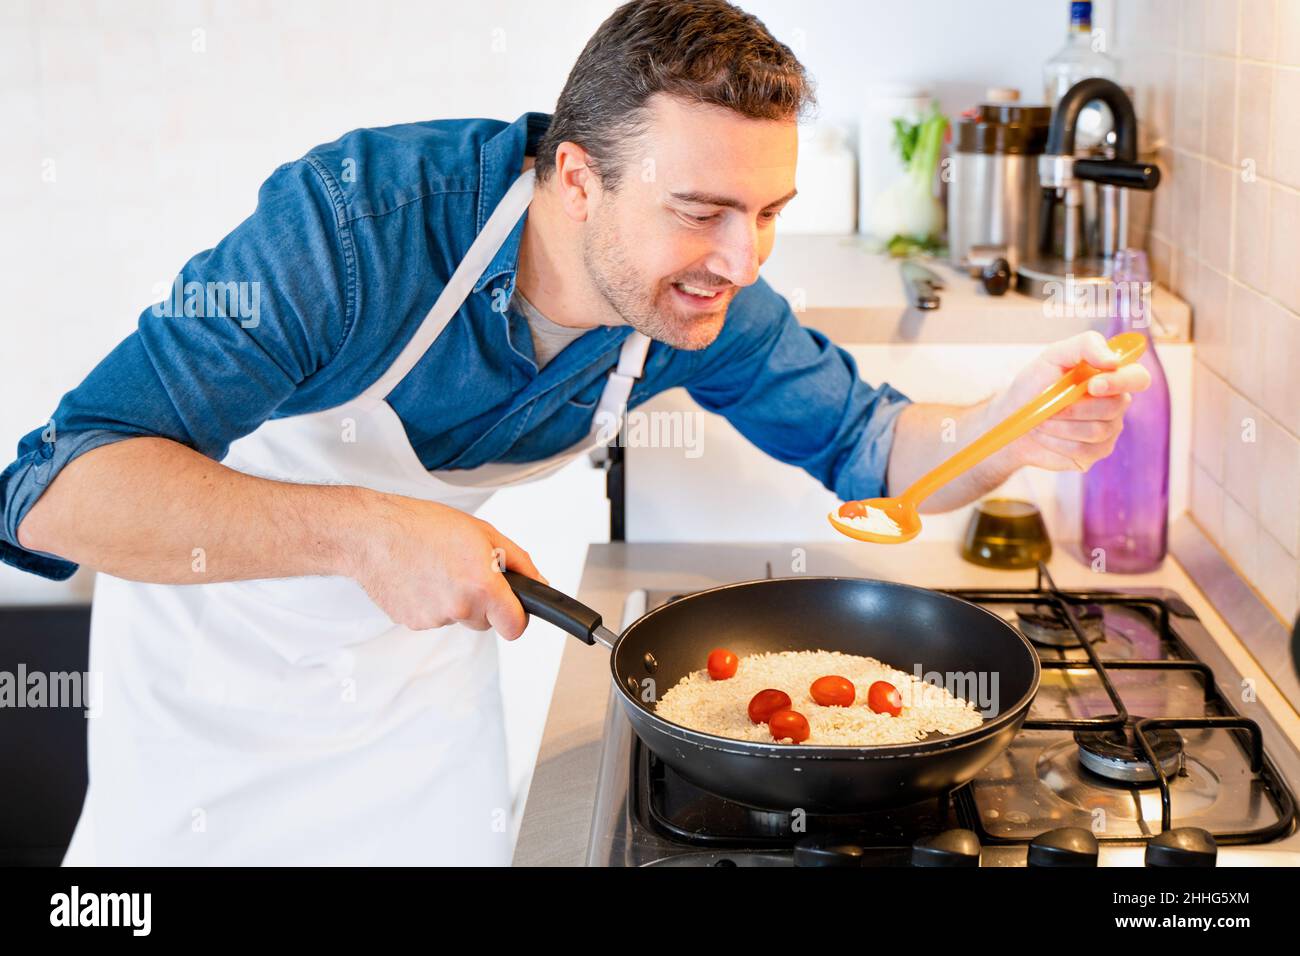 https://c8.alamy.com/comp/2HHG5XM/man-tasting-food-recipe-with-spoon-in-the-kitchen-at-home-2HHG5XM.jpg